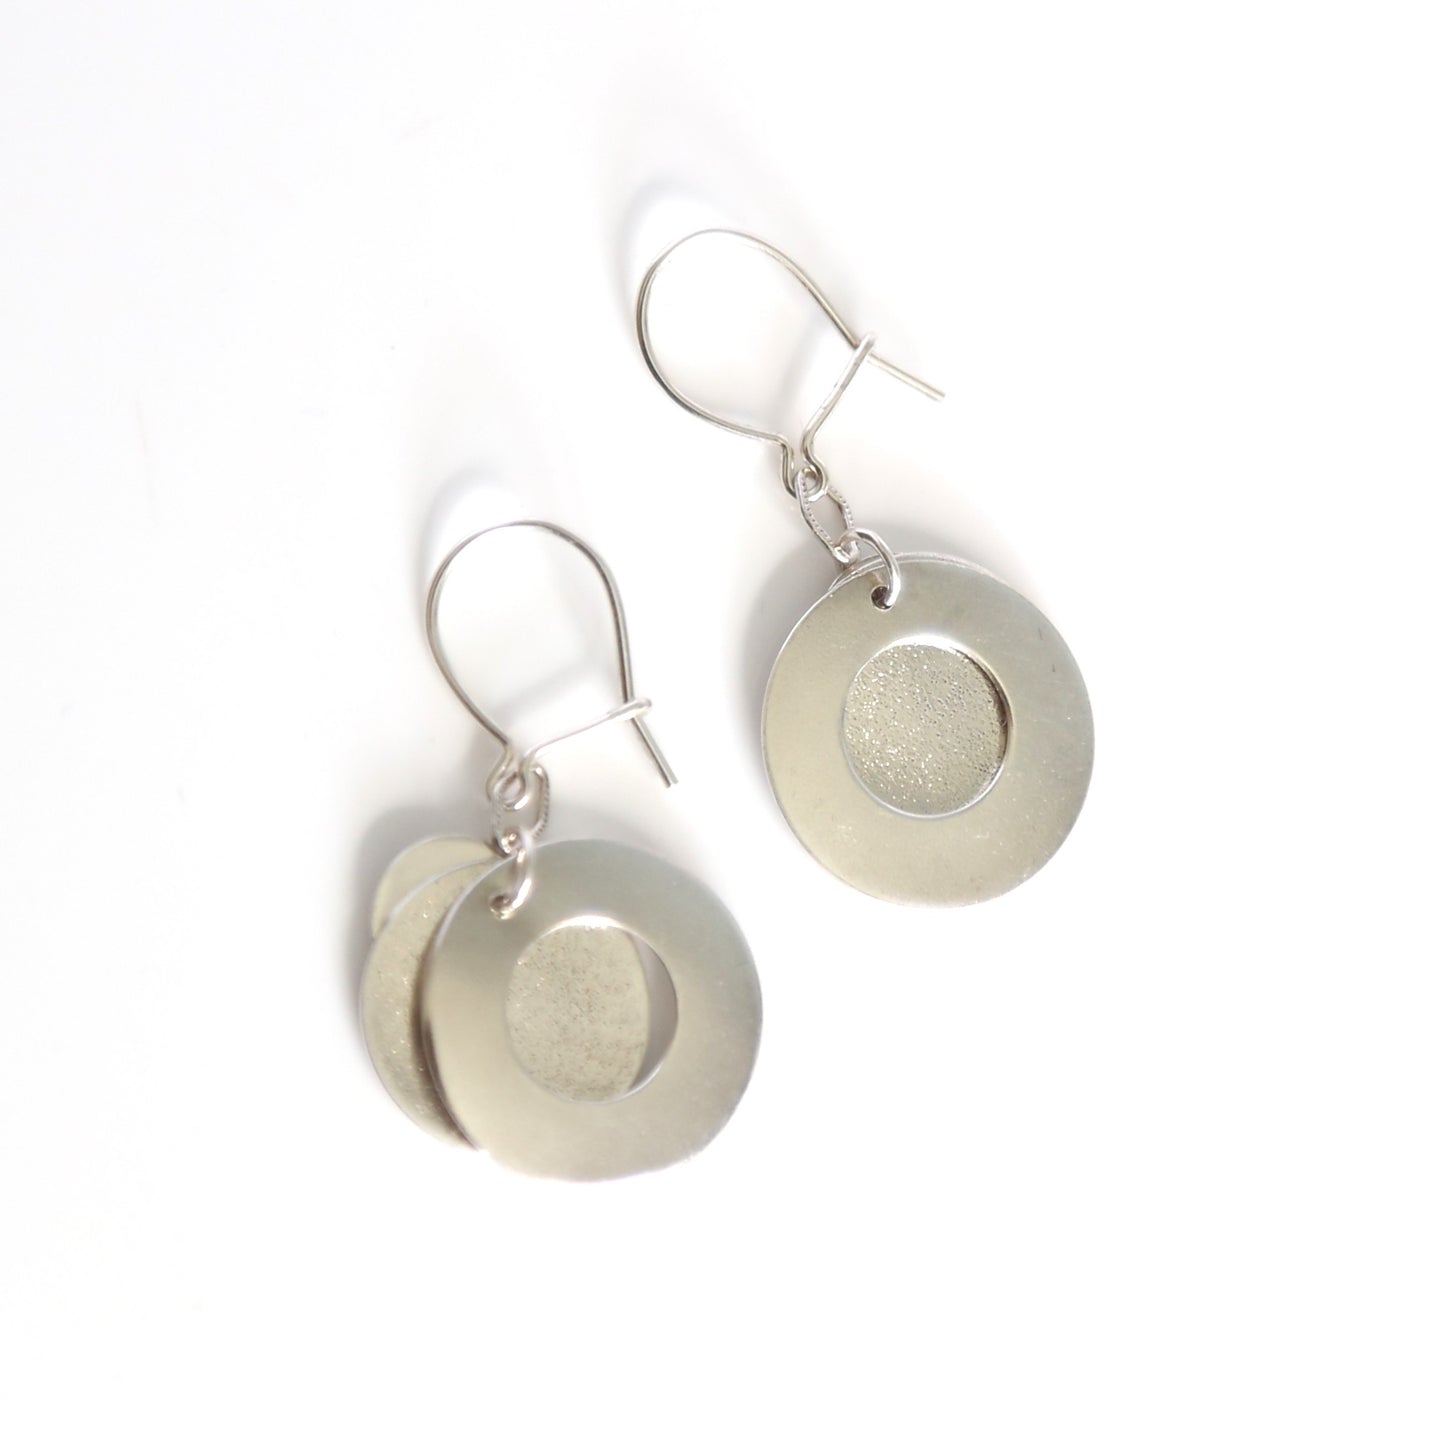 Eclipse Circle Sterling Silver Dangle Kidney Wire Earrings by Cara Carter Jewelry